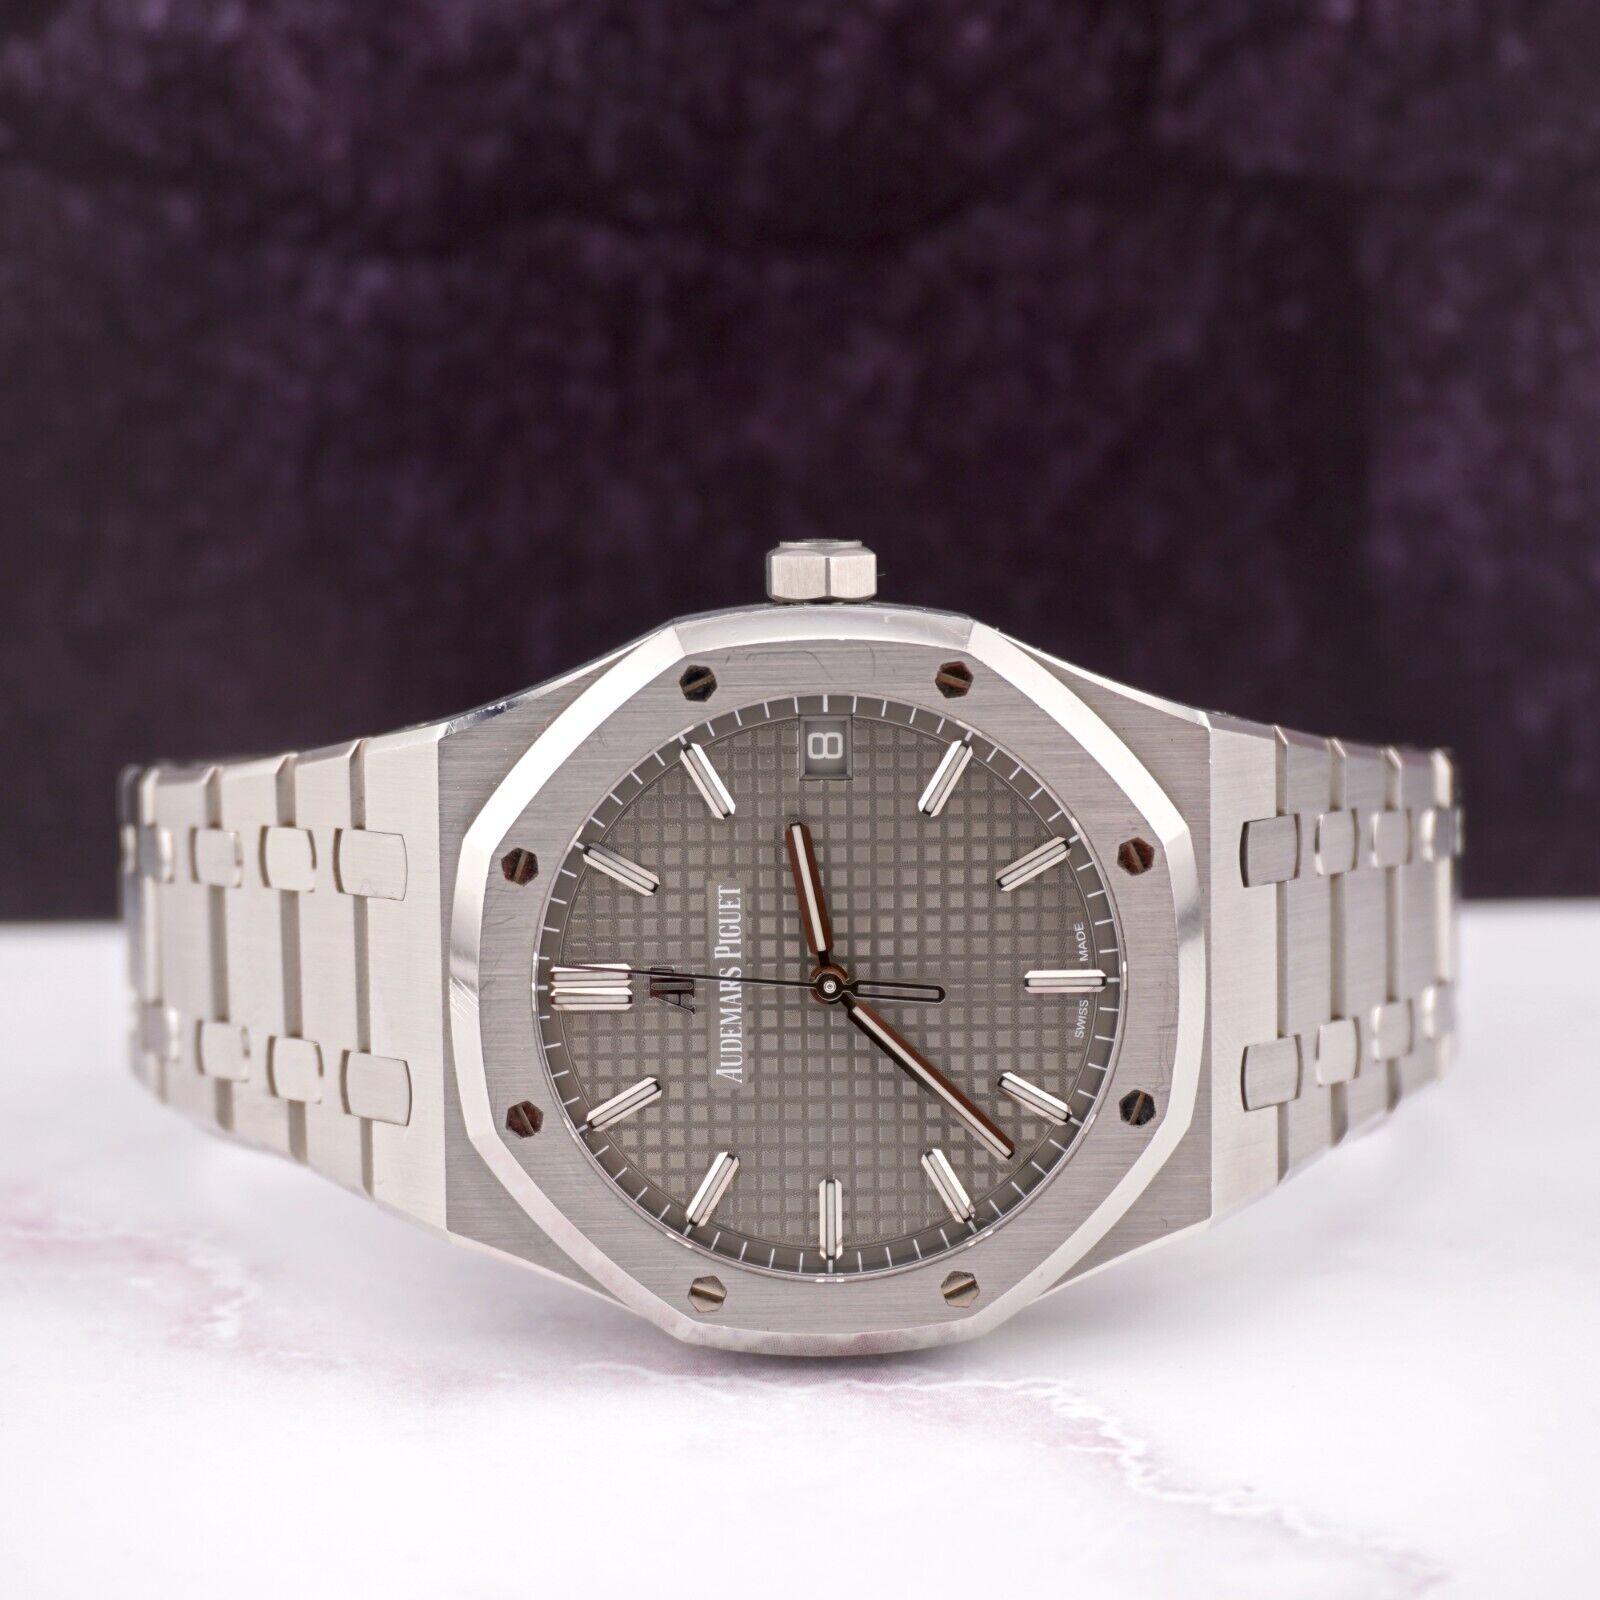 Audemars Piguet Royal Oak 41mm Watch

Pre-owned w/ Original Box & Card
100% Authentic Authenticity Card
Condition - (Excellent Condition) - See Pics
Watch Reference - 15500ST
Model - Royal Oak
Dial Color - Gray
Material - Stainless Steel
Watch Will